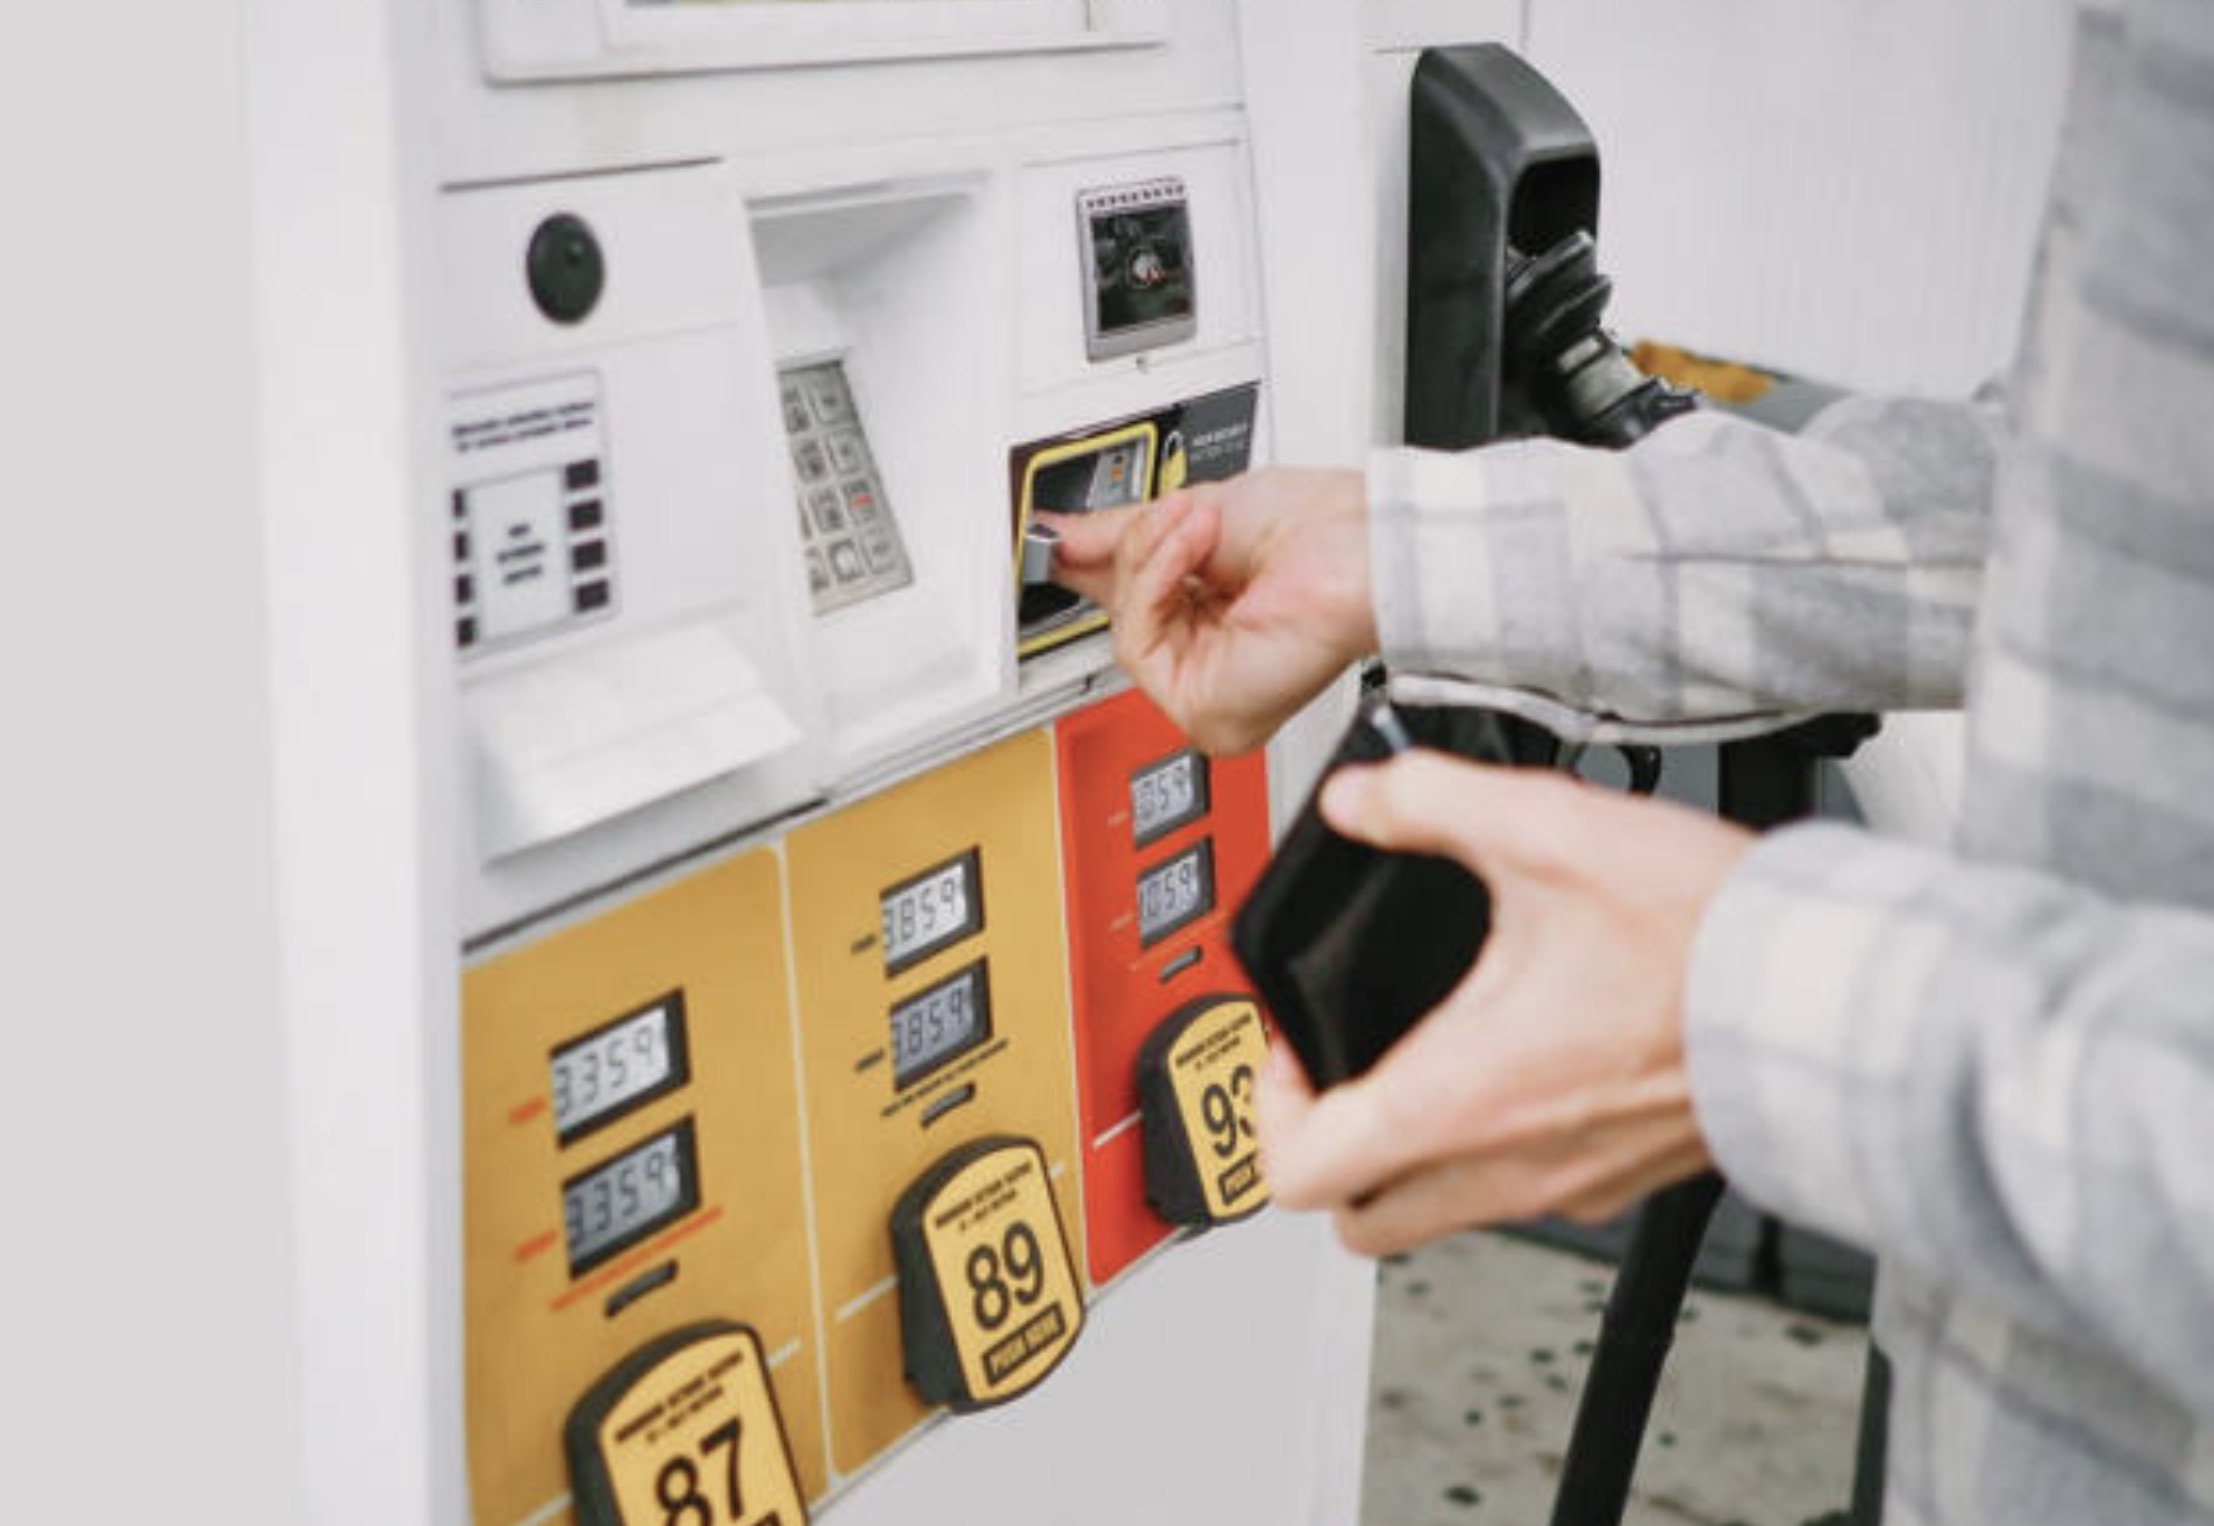 <p>As gas prices soar to unprecedented levels, drivers are vigilant not only about the financial impact but also the looming threat of gas pump skimmers. <br>  </p>   <p>These fraudulent devices, known for compromising credit card information, are commonly placed by thieves on or near card readers at gas pumps and ATMs. Mitigating the risk of falling victim to gas pump skimmers often involves opting to pay inside the gas station, a precautionary measure that demands a few extra minutes. <br>  </p>